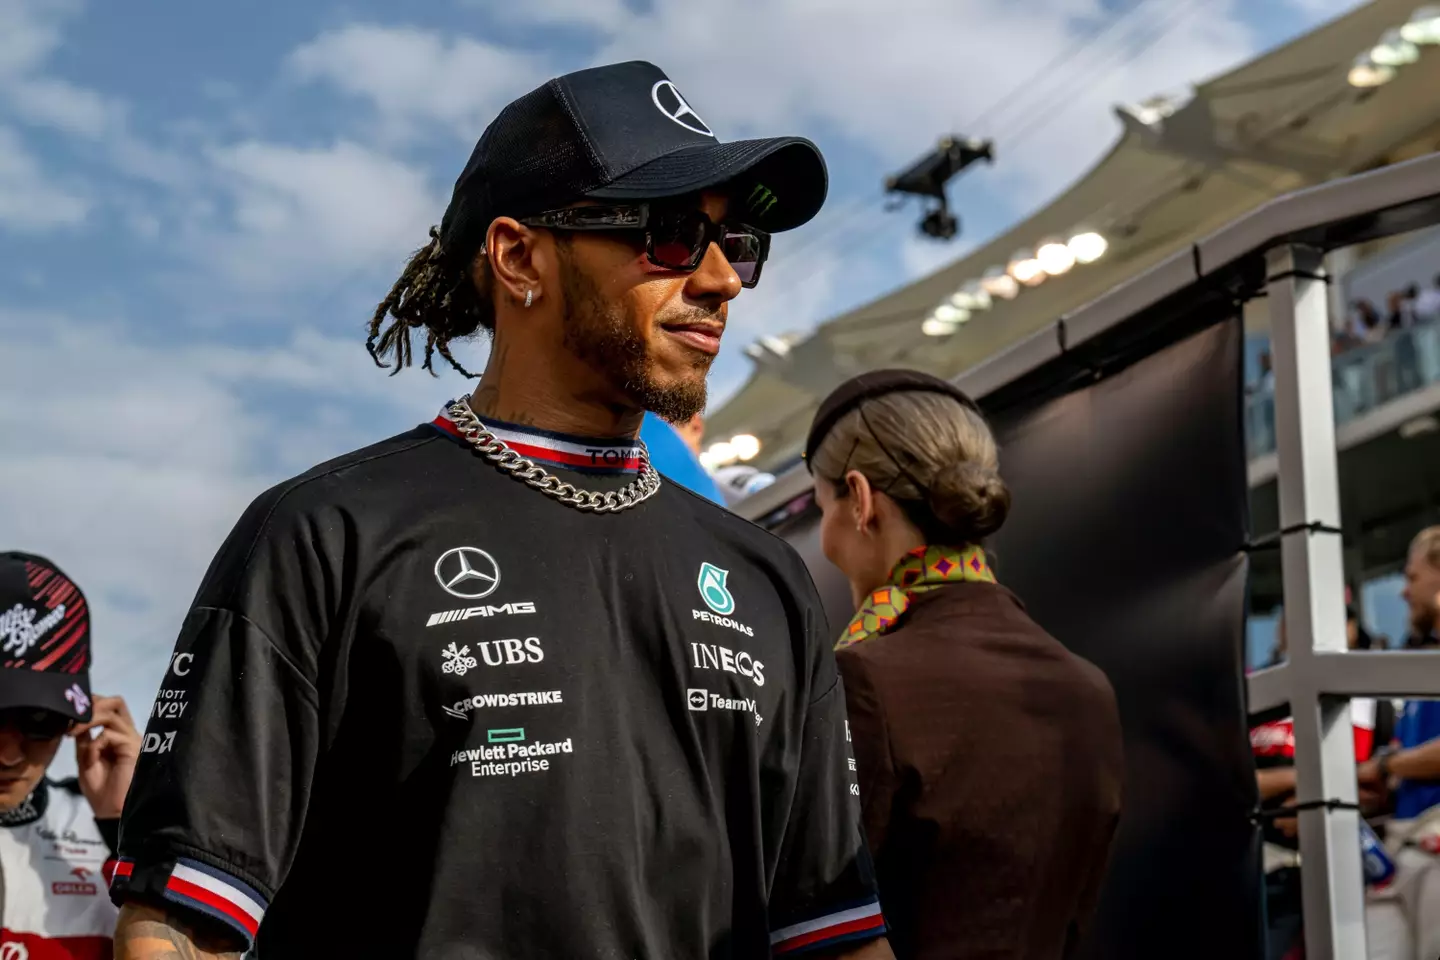 Hamilton had his poorest year in F1 last year. Image: Alamy